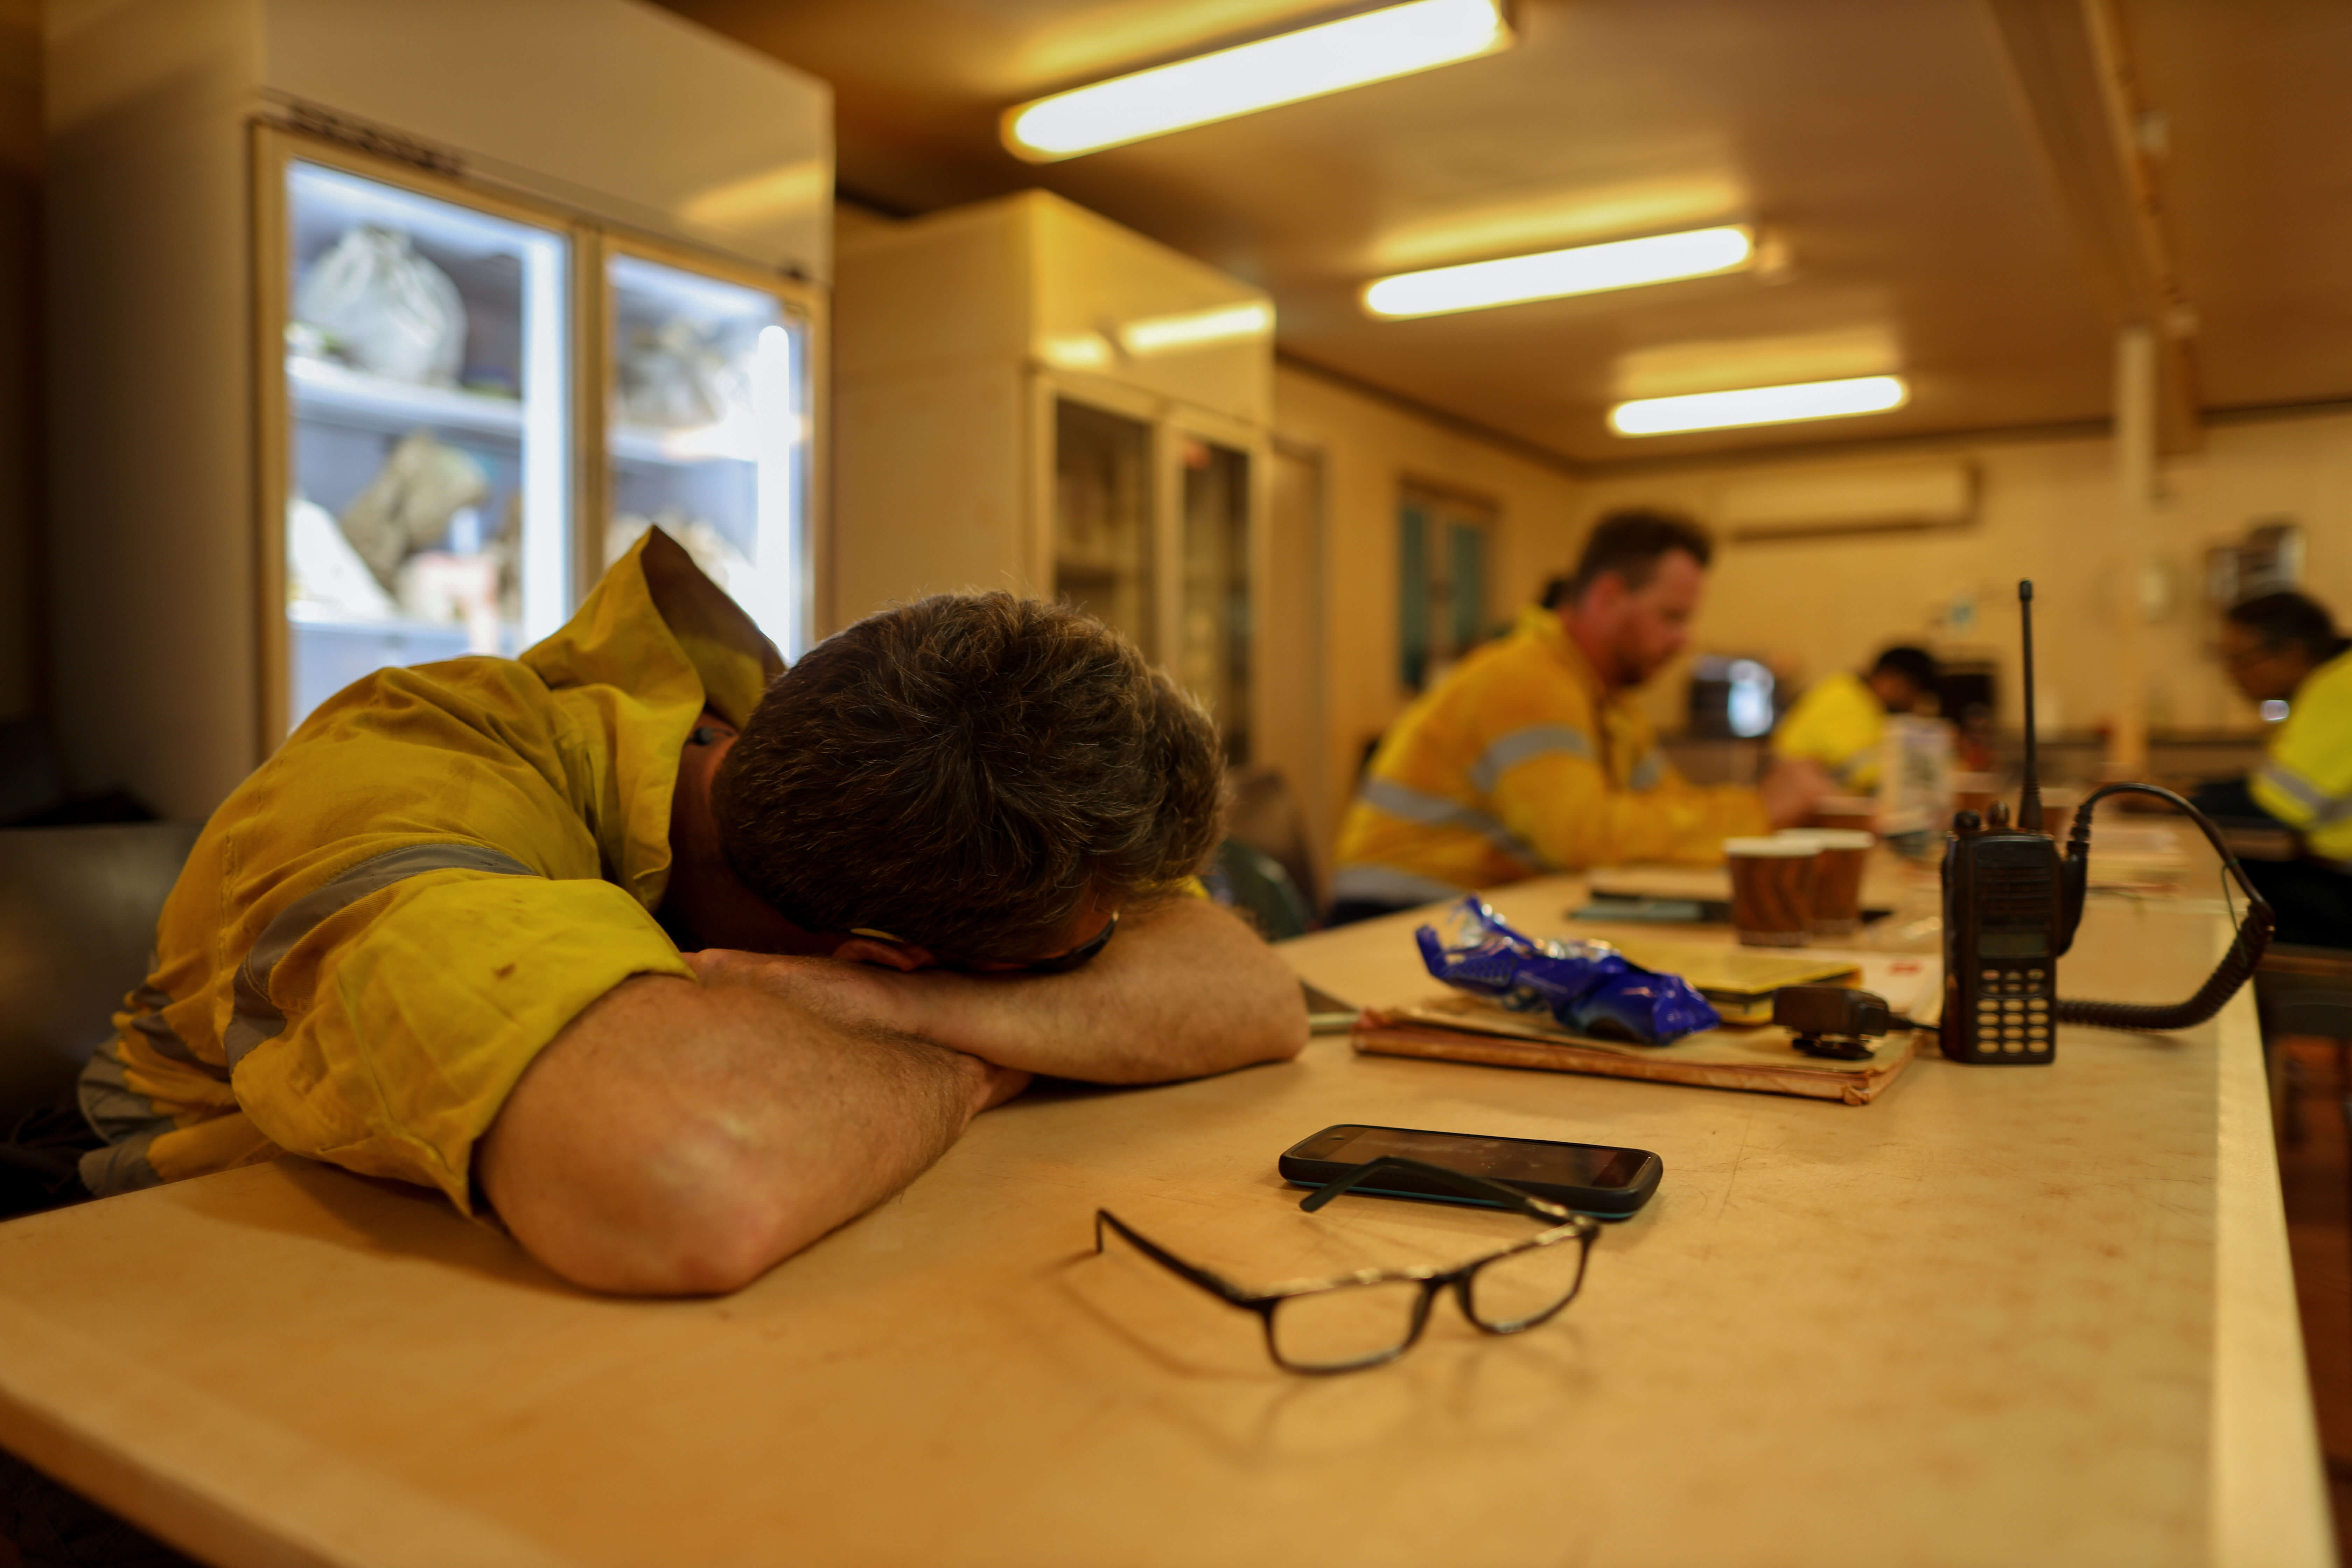 A man wearing a high visibility jacket asleep at his desk with his co-workers hard at work in the background